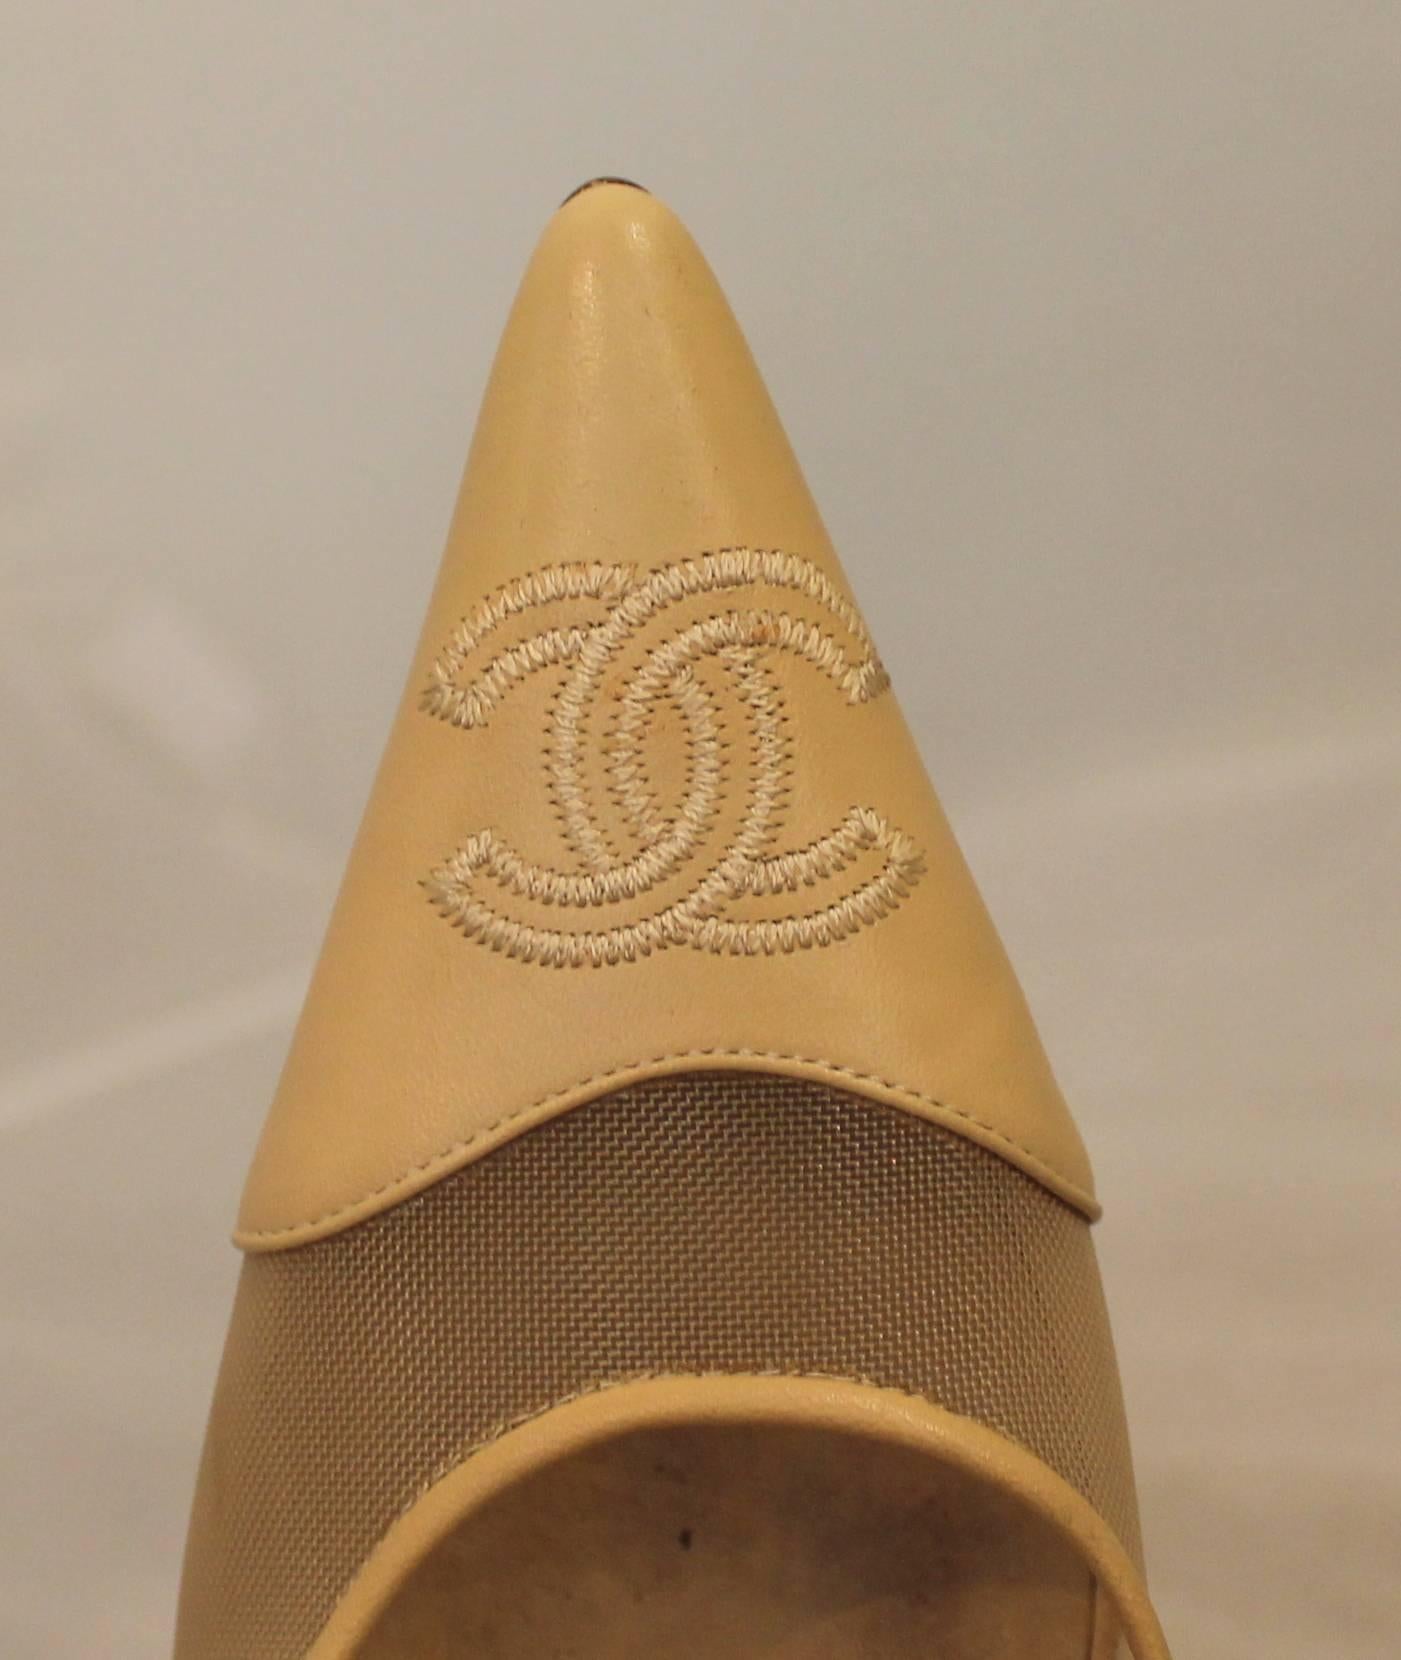 Chanel Beige Leather and Mesh Pumps with Mesh 